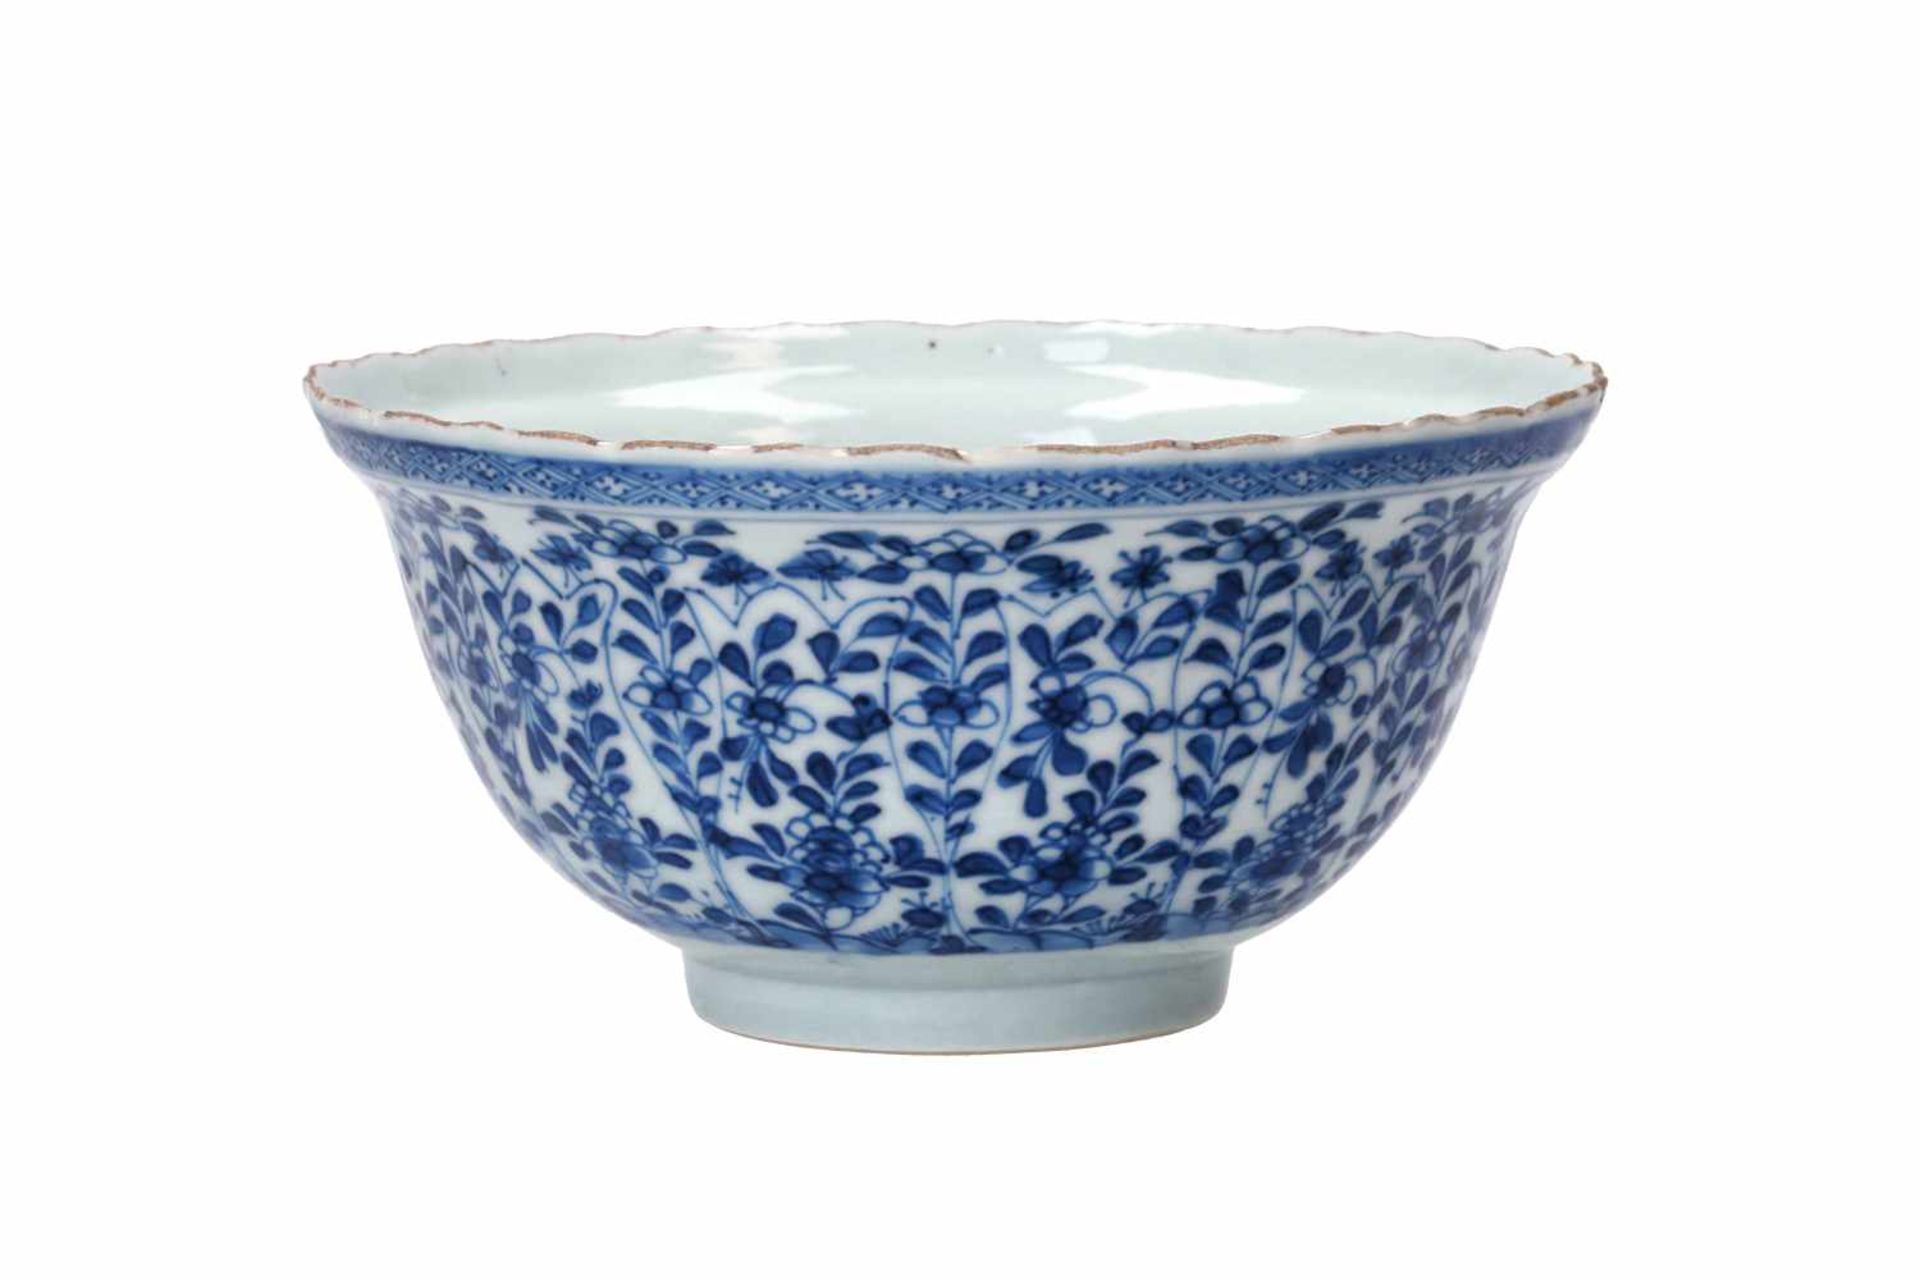 A ribbed blue and white porcelain bowl, decorated with flowers and figures in a garden. Unmarked.